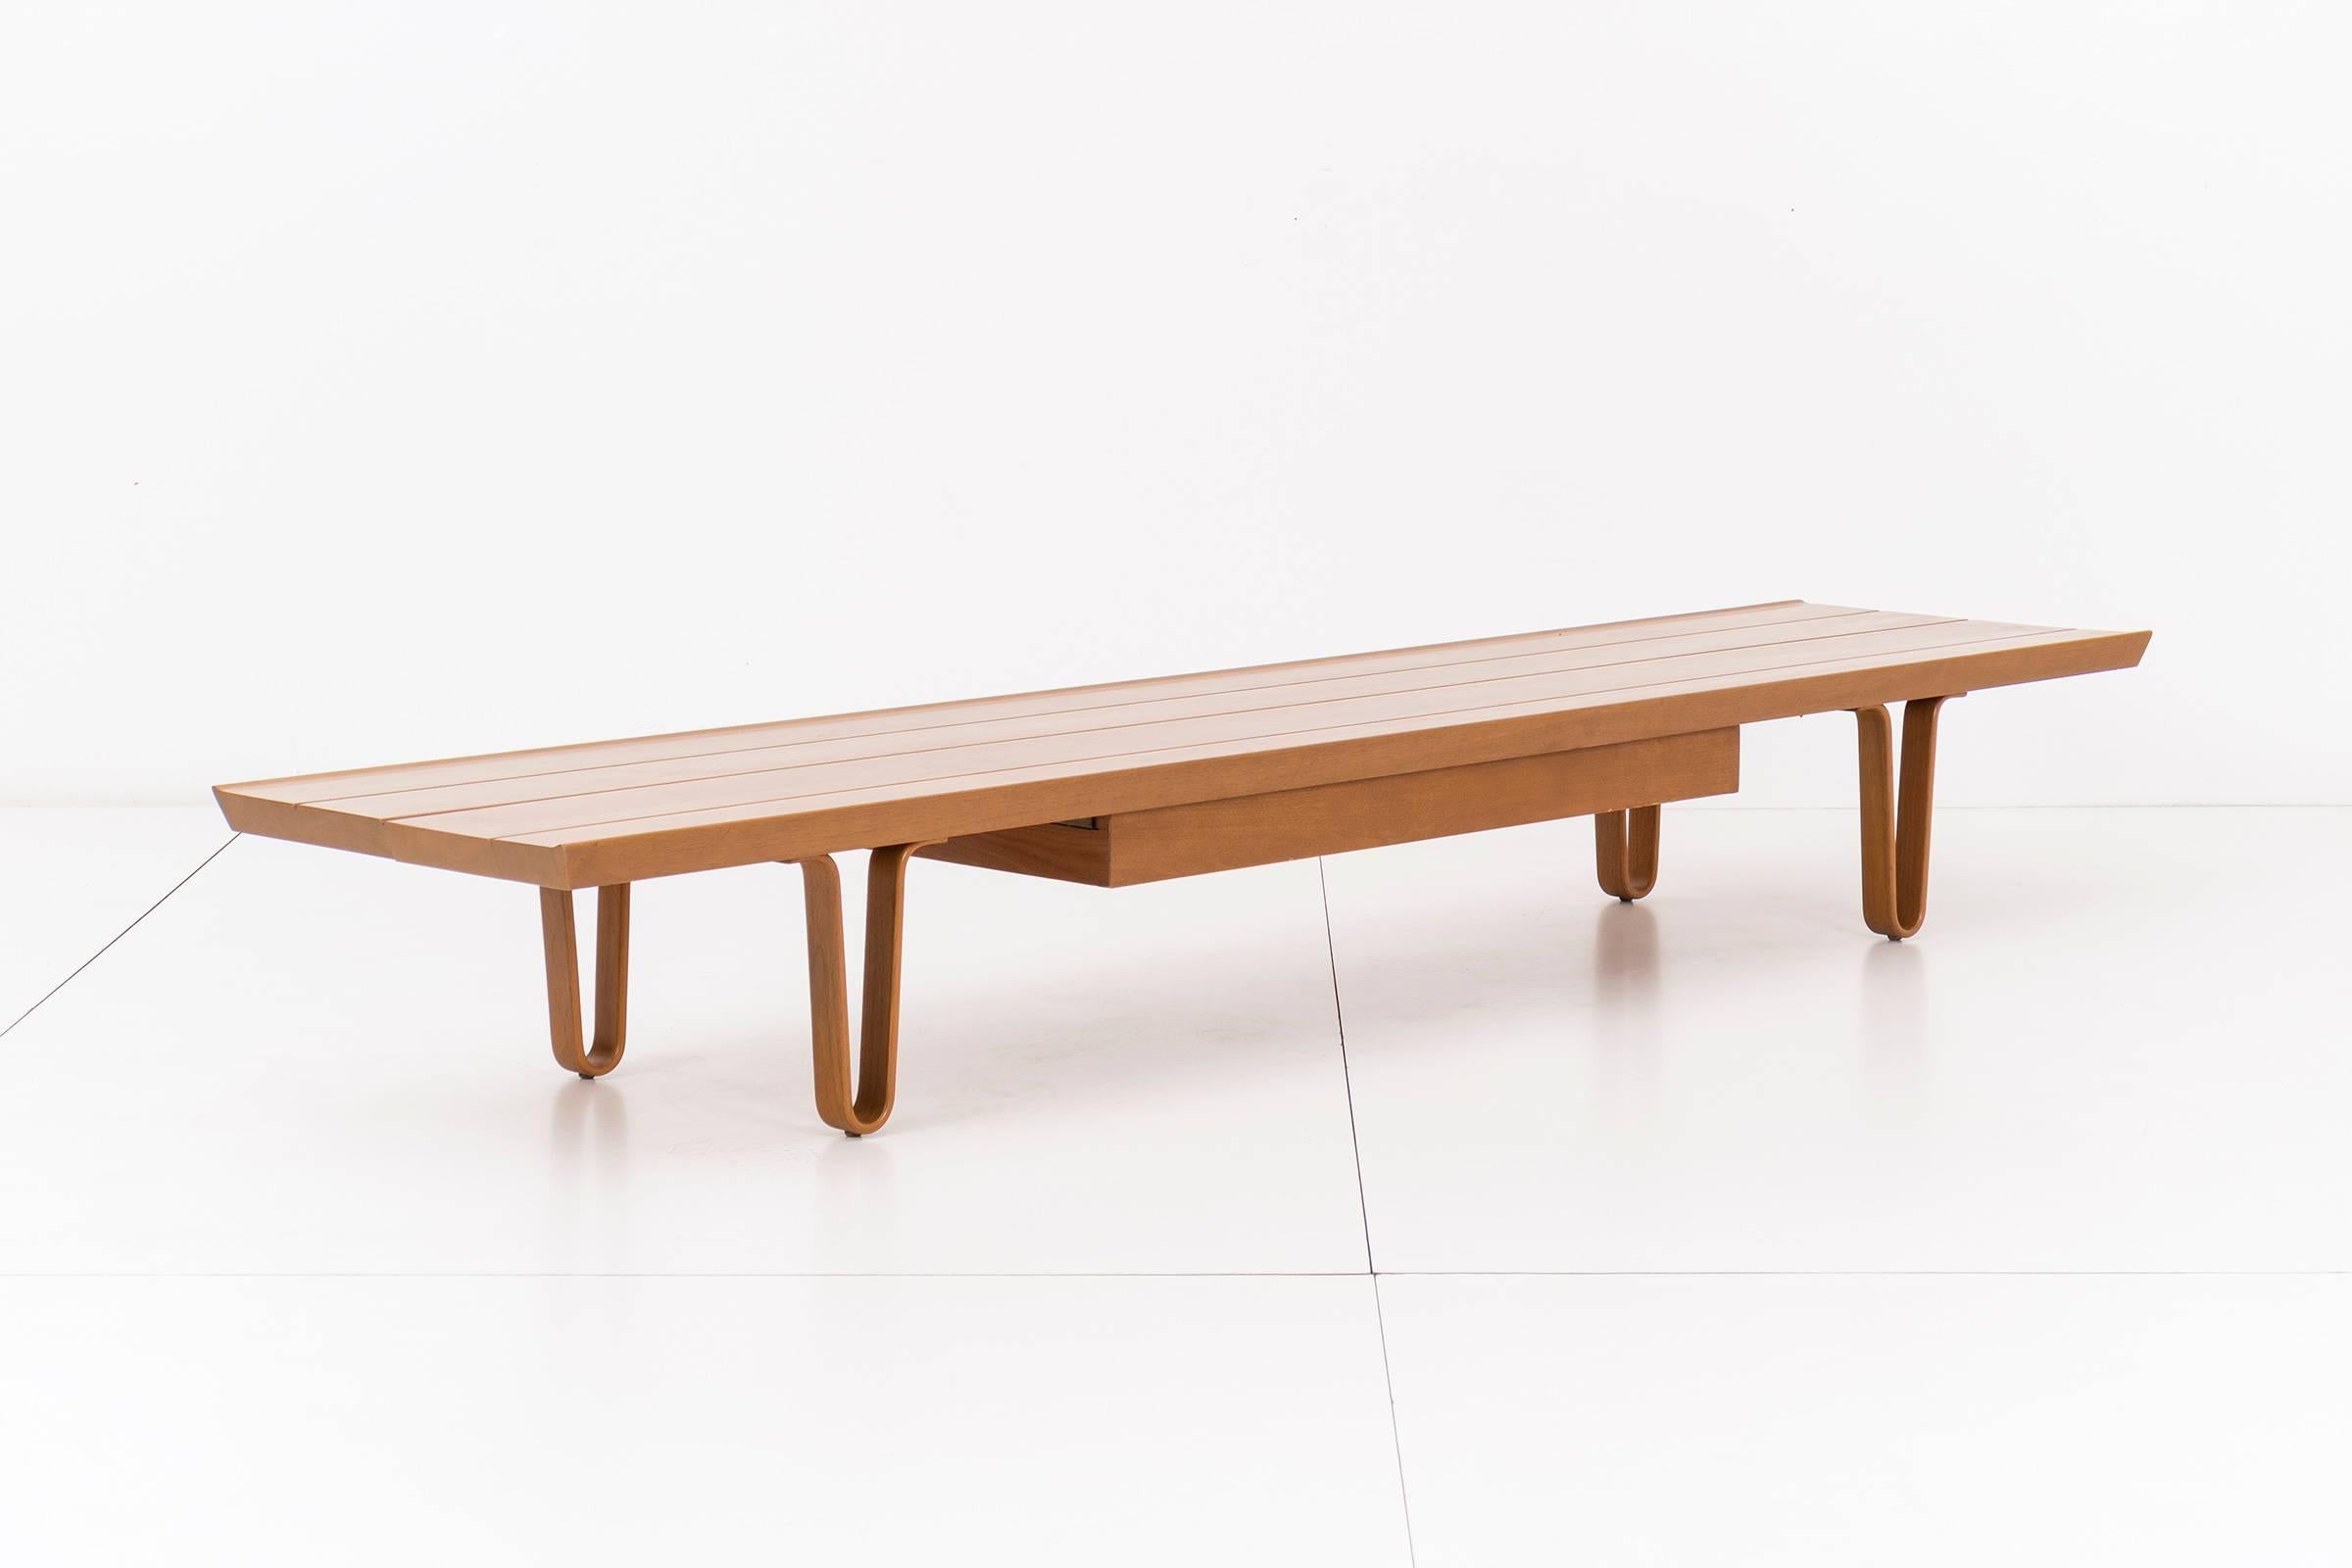 Long John bench or coffee table designed by Edward Wormley for Dunbar. Tongue and groove walnut top with drawer, supported by bentwood hairpin legs.
[Gold Label Dunbar].